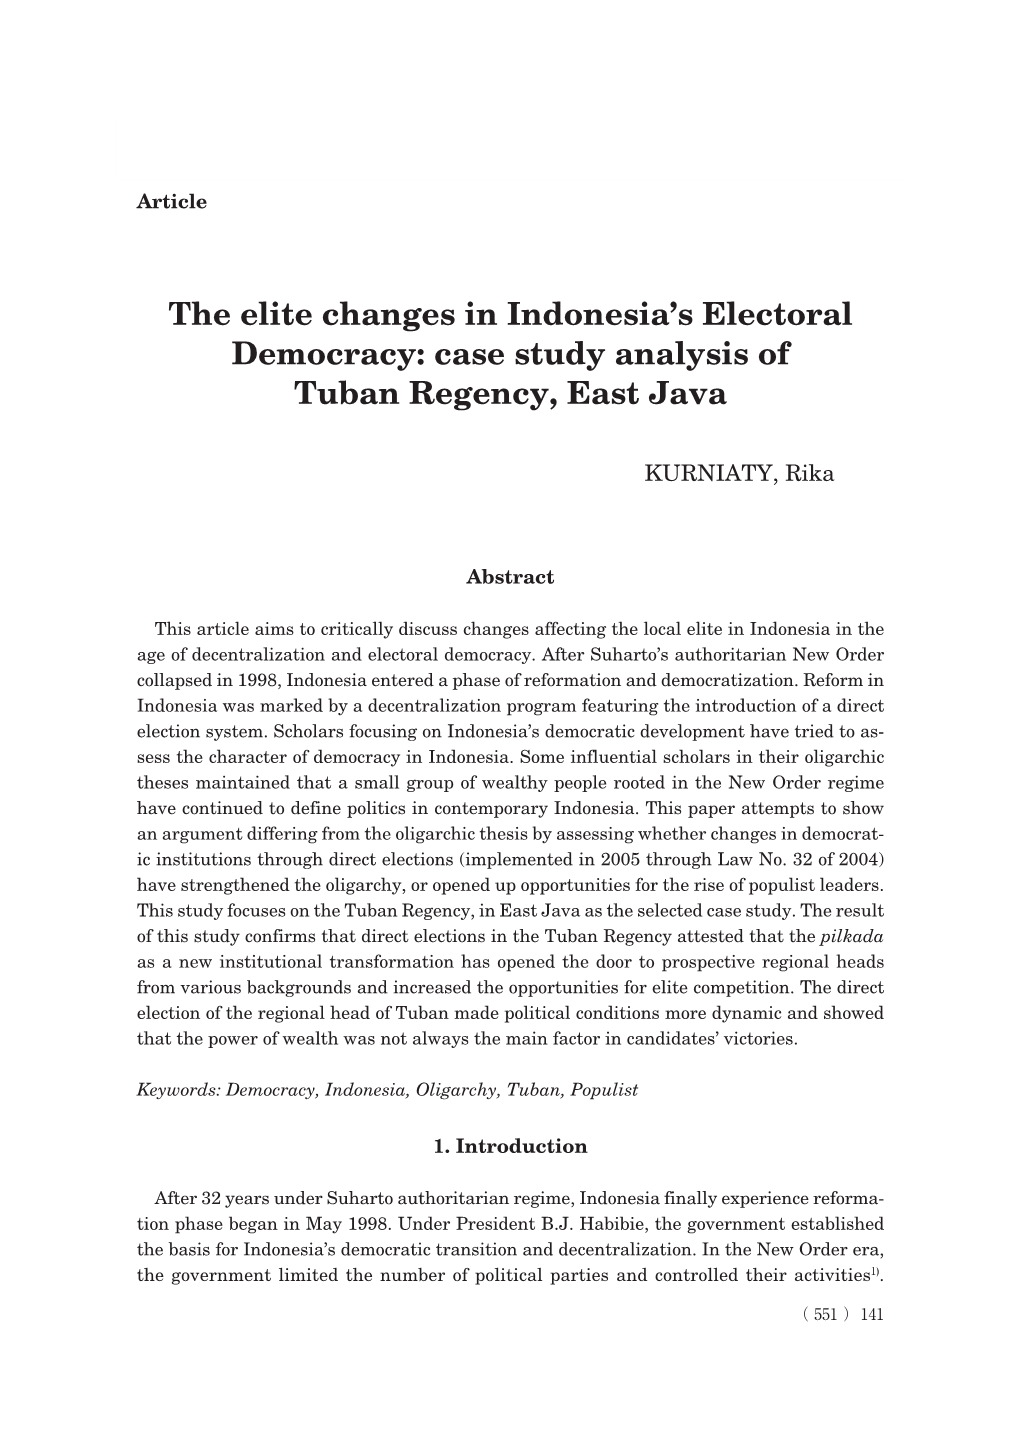 The Elite Changes in Indonesia's Electoral Democracy